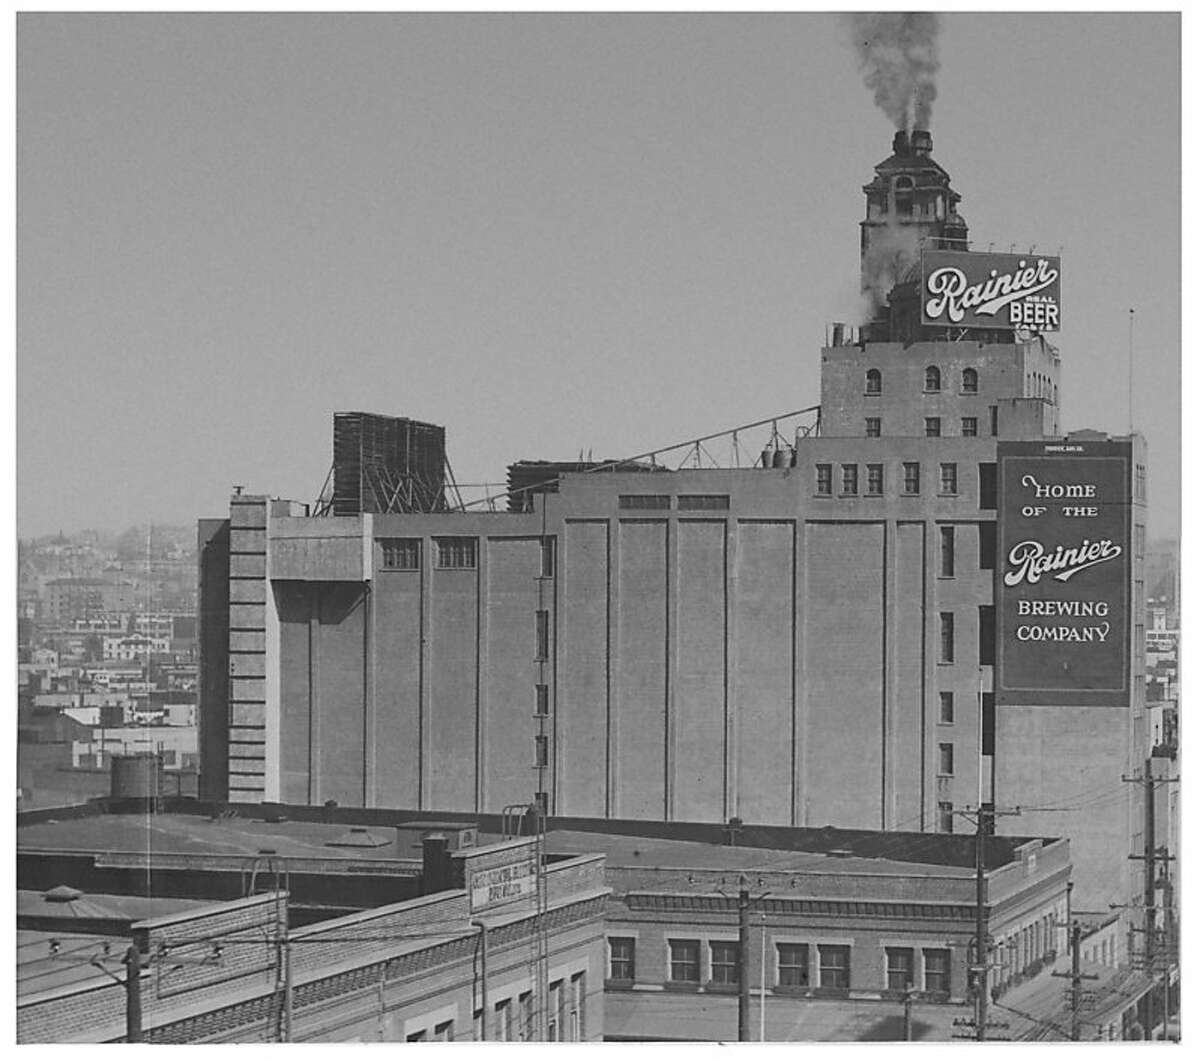 Ranier Brewing Co. had it's brewery at 1800 Bryant St. in San Francisco. Photo was taken 8/31/1931.